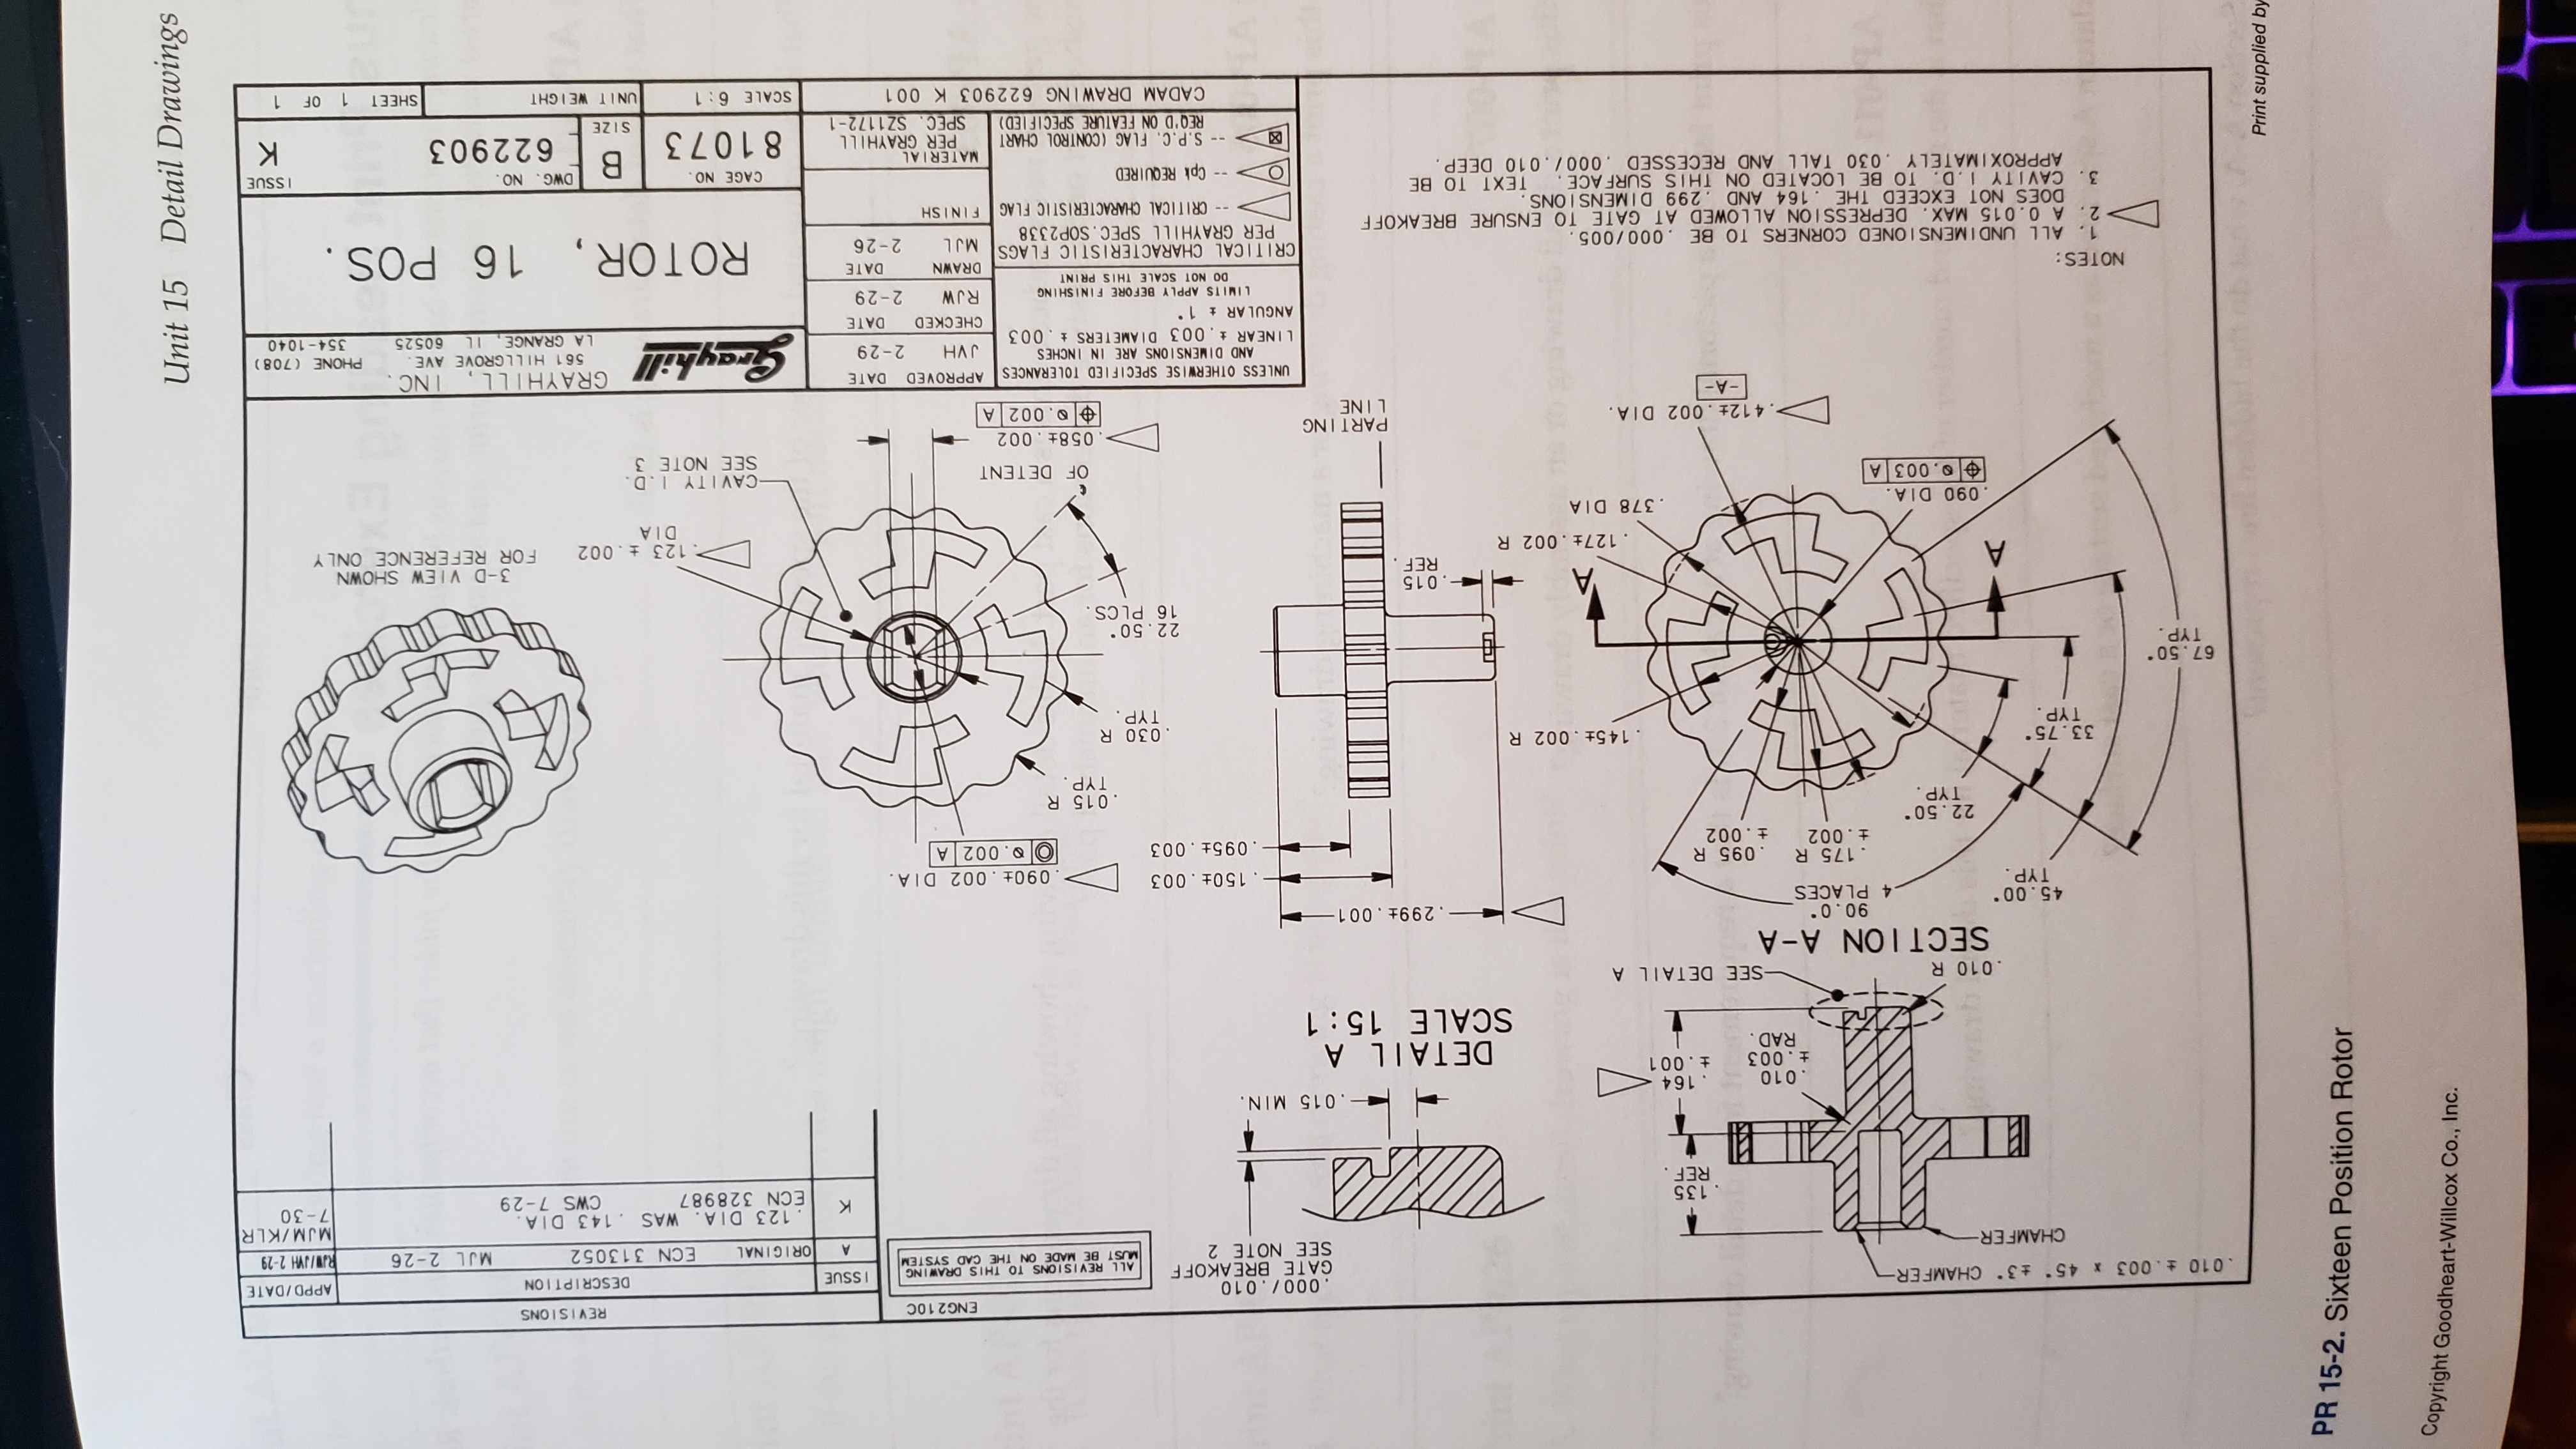 Detail Drawings
Unit 15
E
Print supplied by
PR 15-2. Sixteen Position Rotor
Copyright Goodheart-Willcox Co., Inc.
ENG2 10C
REVISIONS
.000/ .010
GATE BREAKOFF
SEE NOTE 2
.010 003 * 45 3 CHAMF ER-
SSUE
DESCRIPTION
APPD/DATE
ALL REVISI ONS TO THIS DRAWING
MUST BE MADE ON THE CAD SYSTEM
RW/JVH 2-29
MJM/KLR
7-30
CHAMFER-
A
OR IGINAL
ECN 313052
MJL 2-26
.135
REF.
.123 DIA. WAS 143 DIA
ECN 328987
CWS 7-29
-. 015 MIN.
.164
.010
t .003 +.001
RAD.
DETAIL A
SCALE 15 1
.010 R
-SEE DETAILA
SECTION A-A
.00 40
TYP.
90.0
.4 PLACES
.150+.003
.175 R .095 R
t.002
090 002 DIA
.002 A
+ .002
.095t .003
22.50
TYP
.015 R
TYP.
33.75
TYP.
.145+ .002 R
.030 R
TYP.
67.50
TYP.
22.50
16 PLCS.
-. 015
REF
A
3-D VIEW SHOWN
FOR REFERENCE ONLY
.127t .002 R
123 .002
DIA
.378 DIA
.090 DIA
.003 A
-CAV I TY 1.D.
SEE NOTE 3
OF DETENT
PART ING
LINE
.058+ . 002
.002 A
. 412t . 002 DIA.
-A-
GRAYHILL, INC
APPROVED
DATE
UNLESS OTHERWISE SPECIFIED TOLERANCES
AND DIMENSIONS ARE IN INCHES
LINEAR 003 DIAMETERS .003
ANGULAR 1
561 HILLGROVE AVE
PHONE (708)
HAT
CHECKED
2-29
LA GRANGE,
11
60525
354-1040
DATE
LIMITS APPLY BEFORE FINISHING
RJW
2-29
NOTES:
DO NOT SCALE THIS PRINT
910
ROTOR, 16 POS.
DRAWN
DATE
CRITICAL CHARACTERISTIC FLAGS
PER GRAYHILL SPEC.SOP2338
1. ALL UNDIMENS I ONED CORNERS TO BE .000 /005.
2. A 0.015 MAX. DEPRESSI ON ALLOWED AT GATE TO ENSURE BREAKOFF
DOES NOT EXCEED THE .164 AND .299 DIMENSIONS.
3. CAVITY I.D. TO BE LOCATED ON THIS SURFACE. TEXT TO BE
APPROXIMATELY .030 TALL AND RECESSED .000/.010 DEEP
MJL
2-26
CRITICAL CHARACTERISTIC FLAG FINISH
-- Cpk REQUIRED
CAGE NO
DWG
ISSUE
ON
MATERIAL
PER GRAYHILL
SPEC. SZ1172-1
81073
-- S.P.C. FLAG (CONTROL CHART
622903
X
REQ'D ON FEATURE SPECIFIED)
3ZIS
CADAM DRAWING 622903 K 001
SCALE 6:1
SHEET 1 OF 1
UNIT WEIGHT
